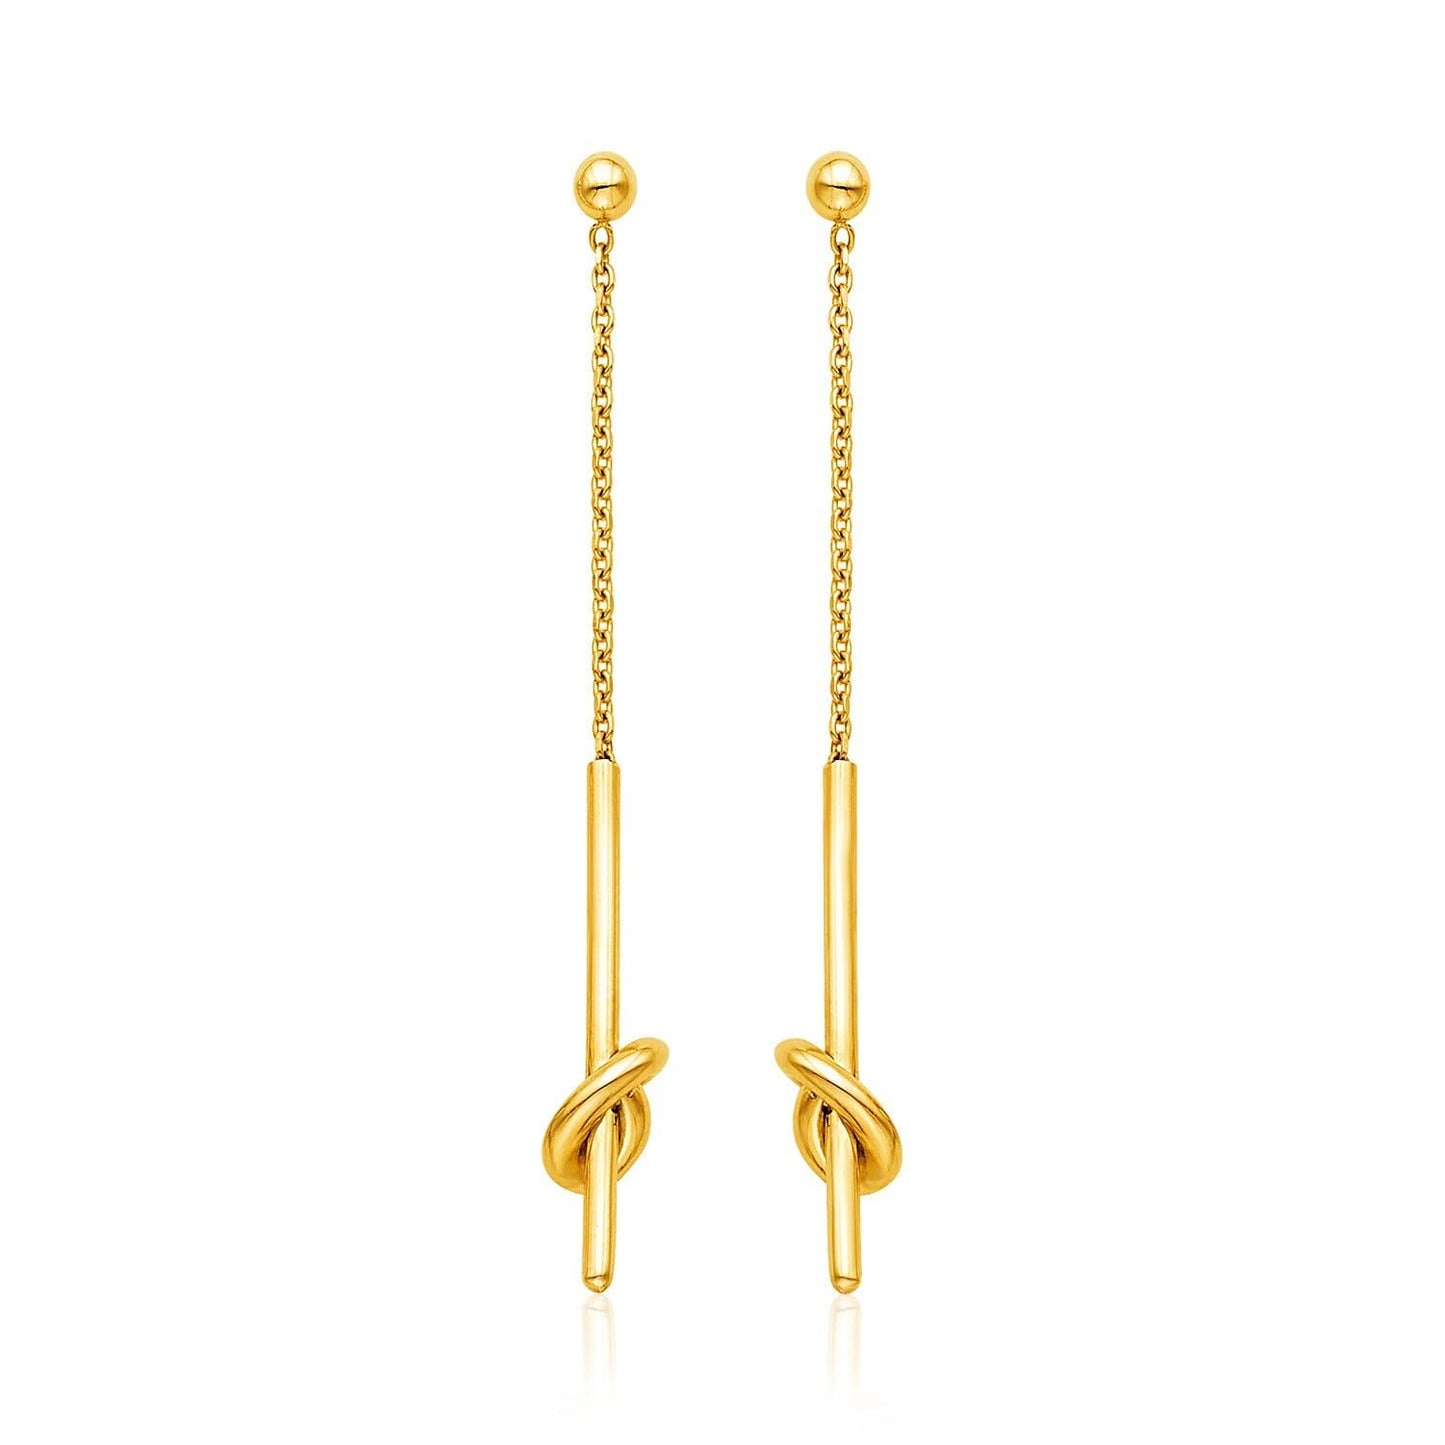 14k Yellow Gold Dangle Earrings with Knots